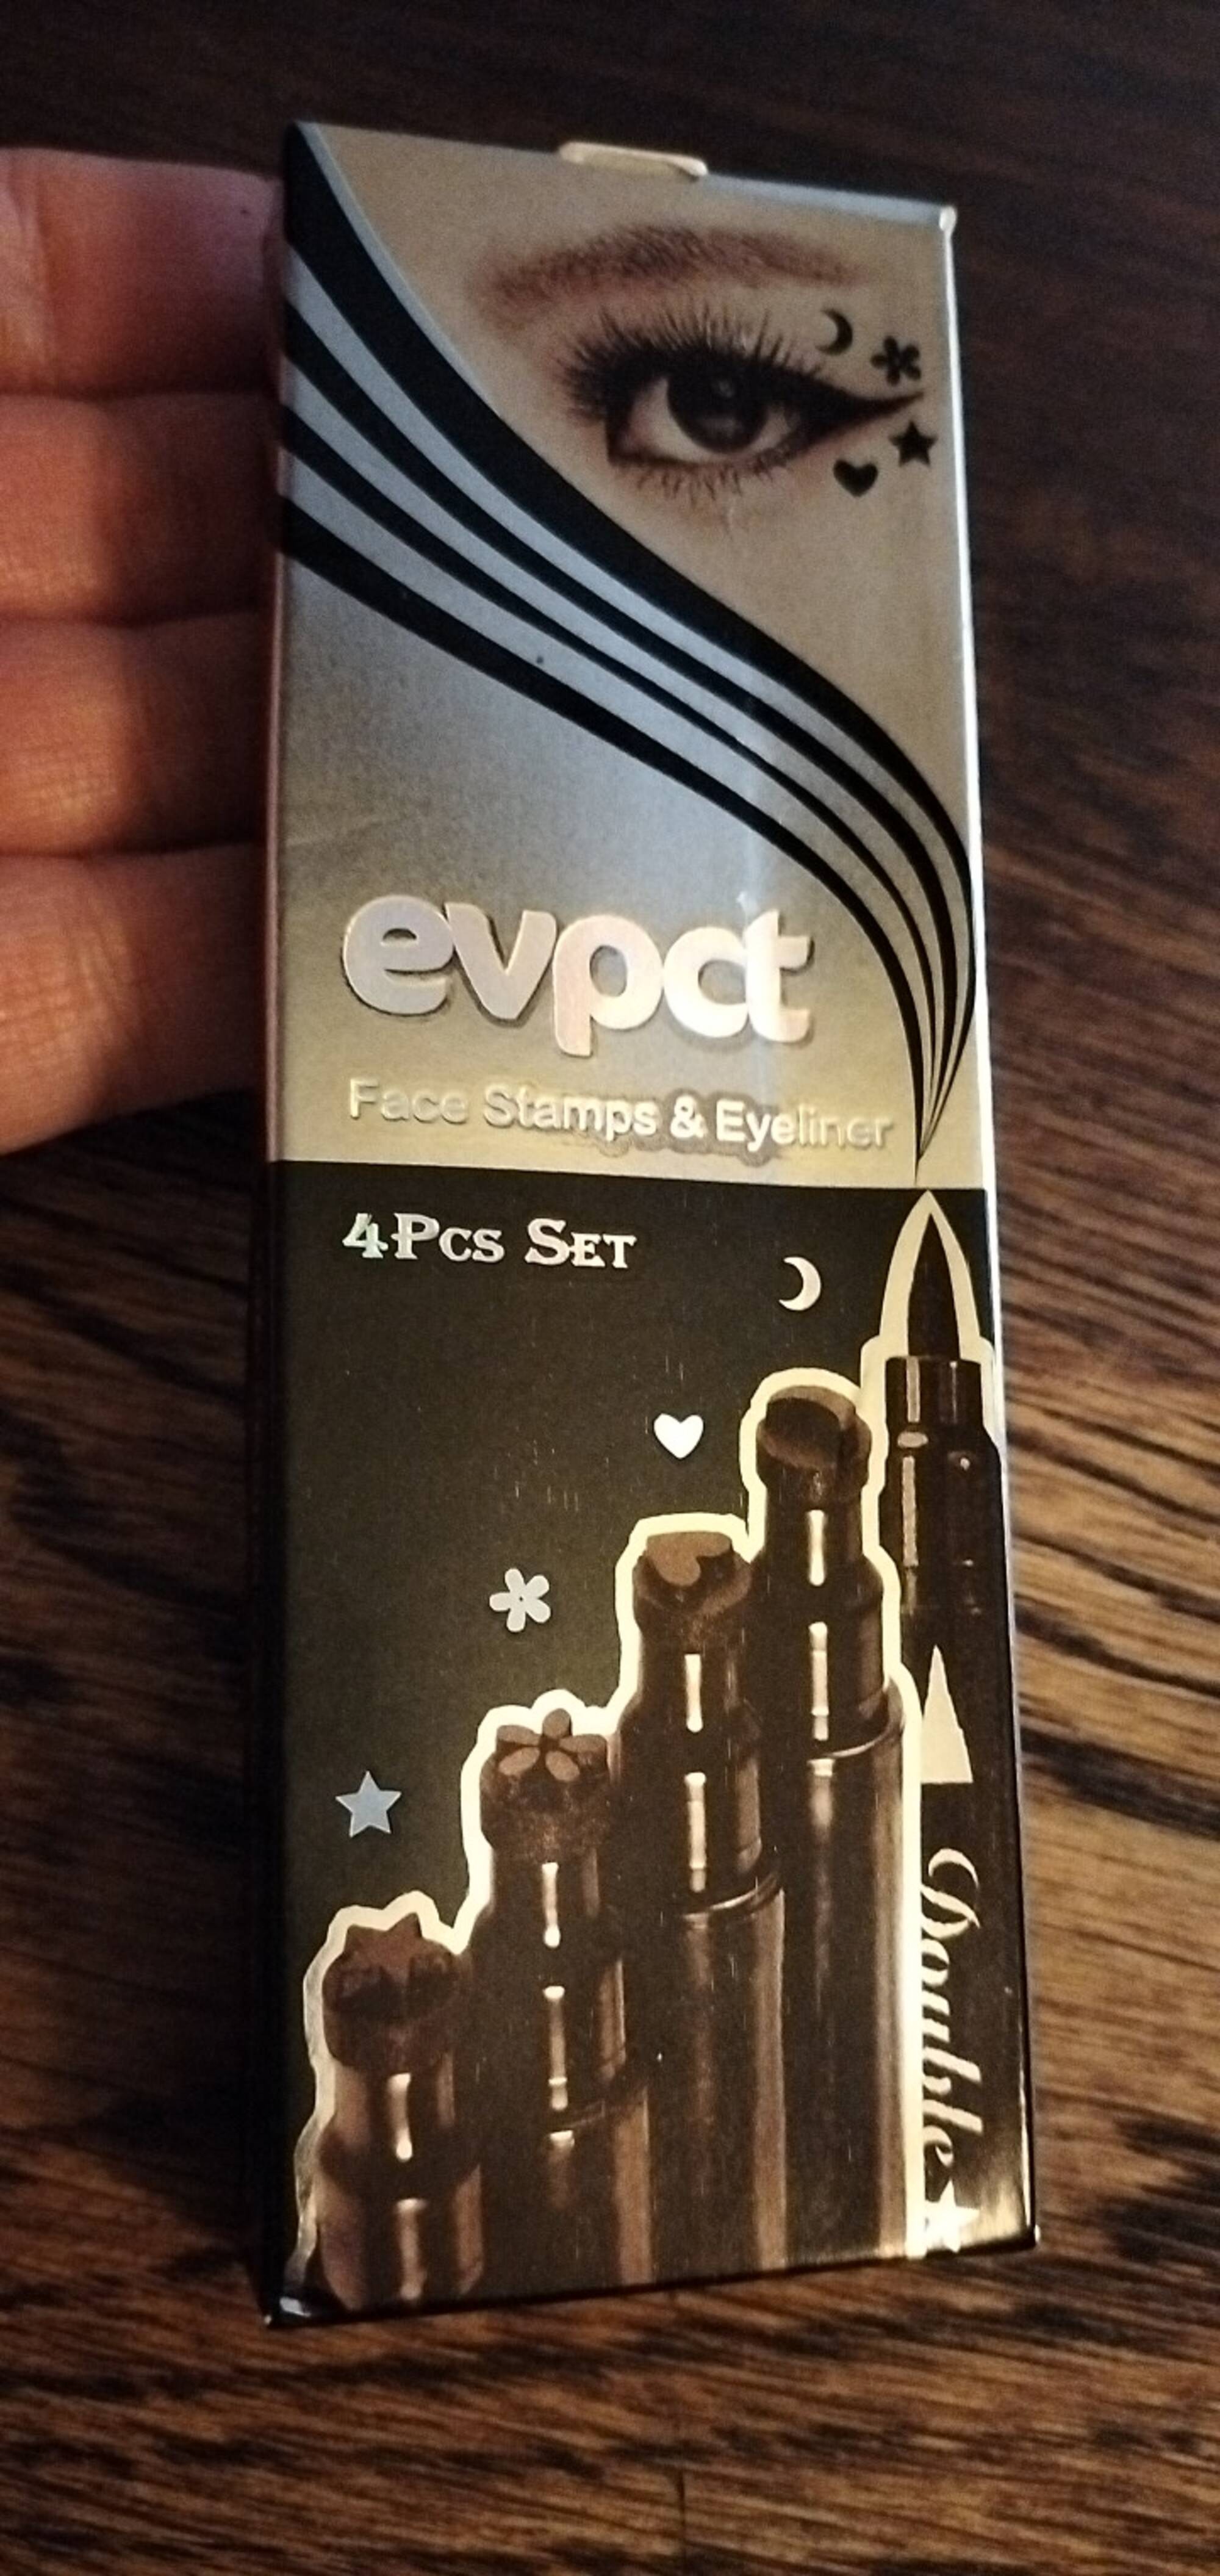 EVPCT - Face stamps & eyeliner